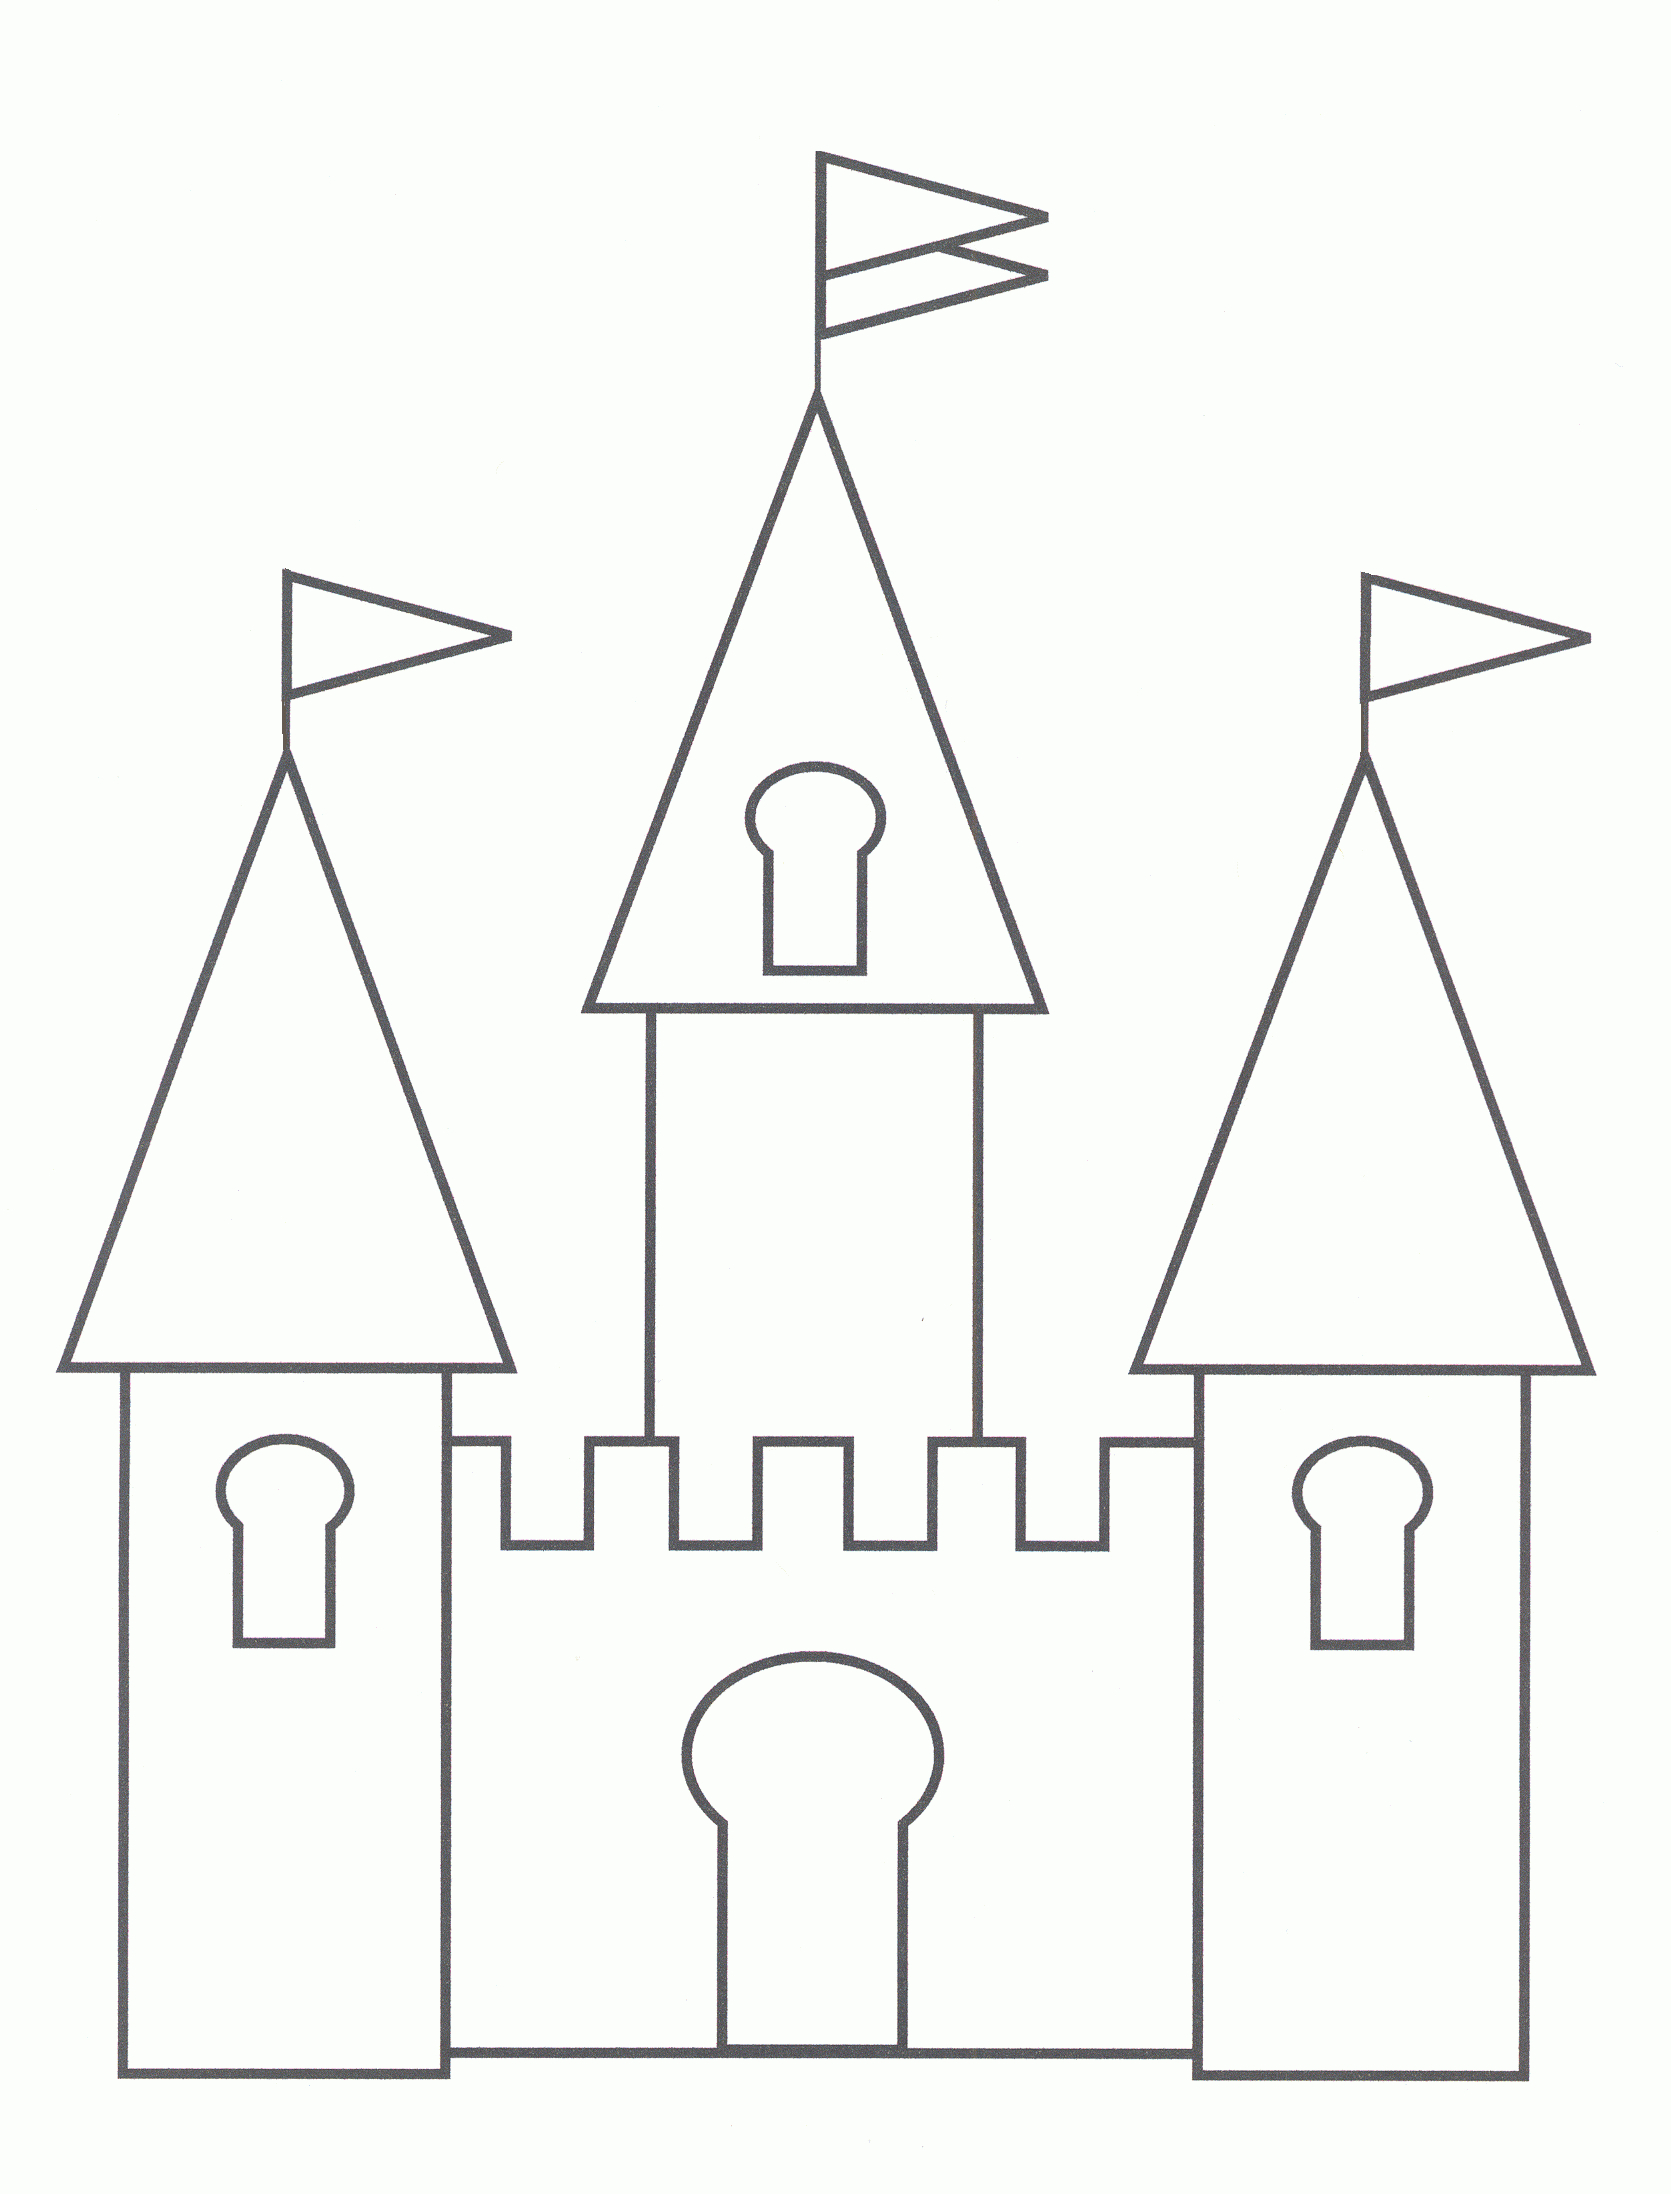 Free Printable Castle Coloring Pages For Kids | Kinder Fairy Tales - Free Printable Castle Templates